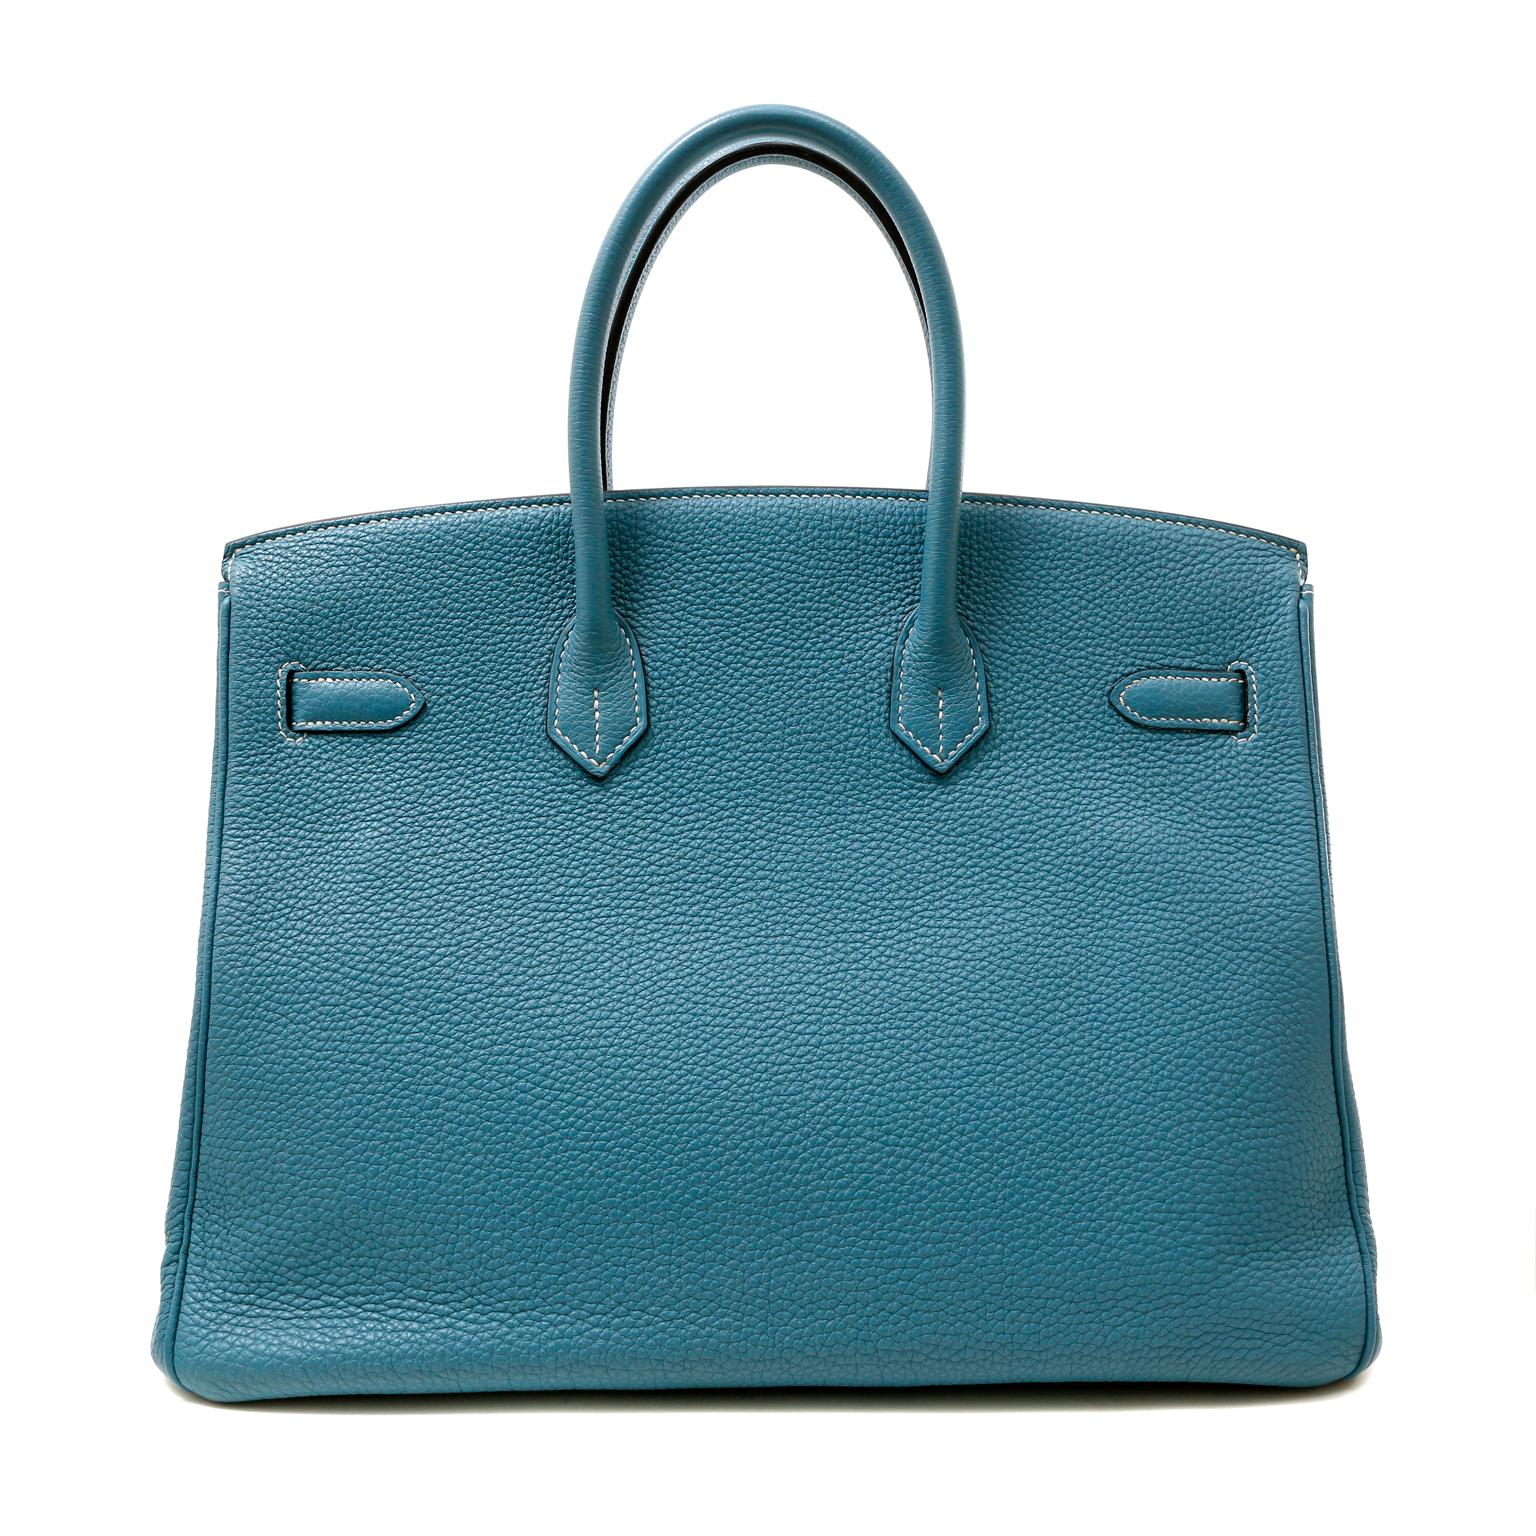 This authentic Hermès Denim Blue Togo 35 cm Birkin is in pristine condition.  Perfectly paired with sophisticated Palladium hardware, it is a must have for blue lovers.
Textured and durable Togo leather is soft to the hand and maintains the shape of